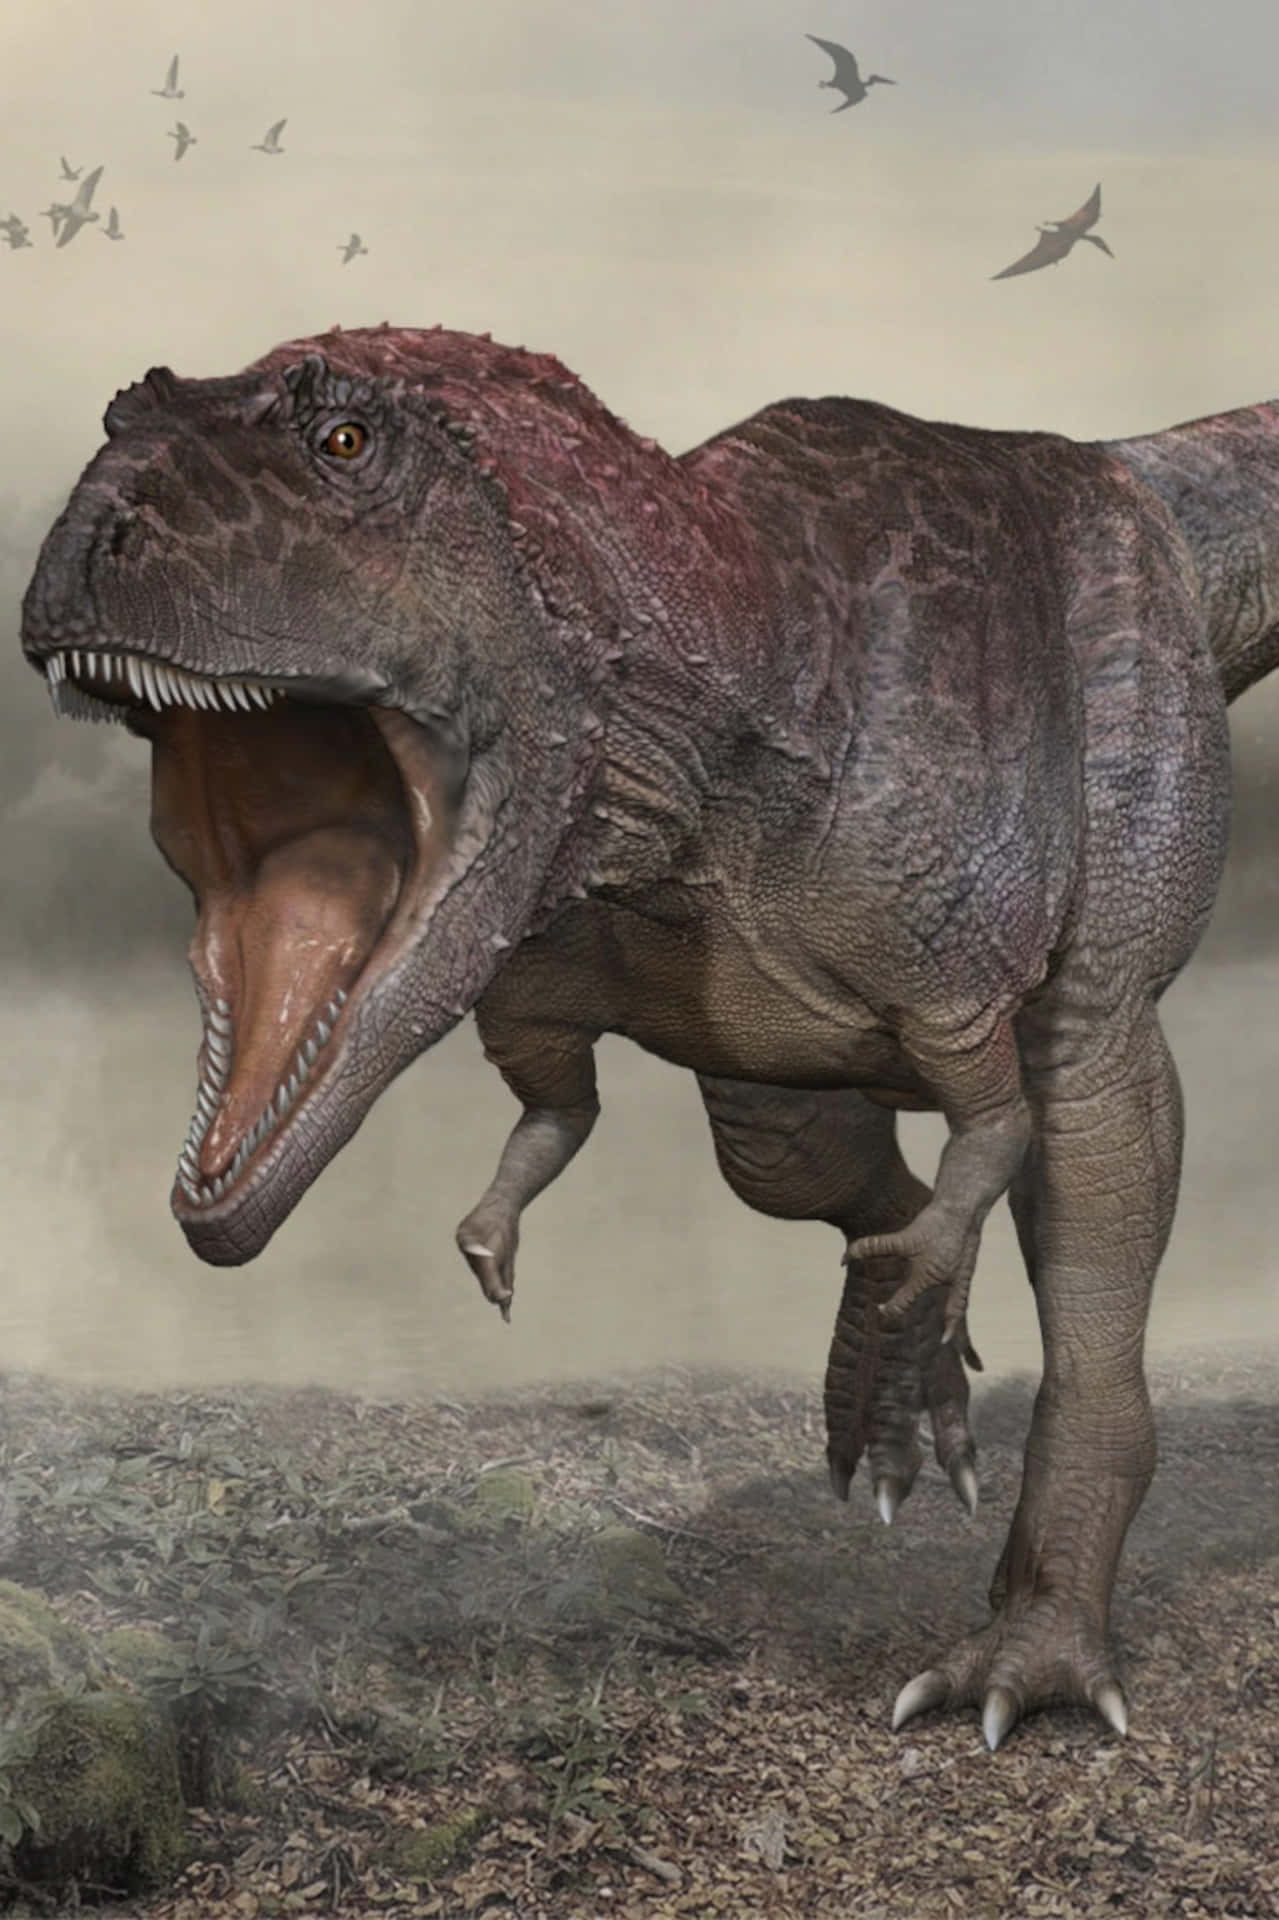 A Dinosaur Is Walking In The Field With Its Mouth Open